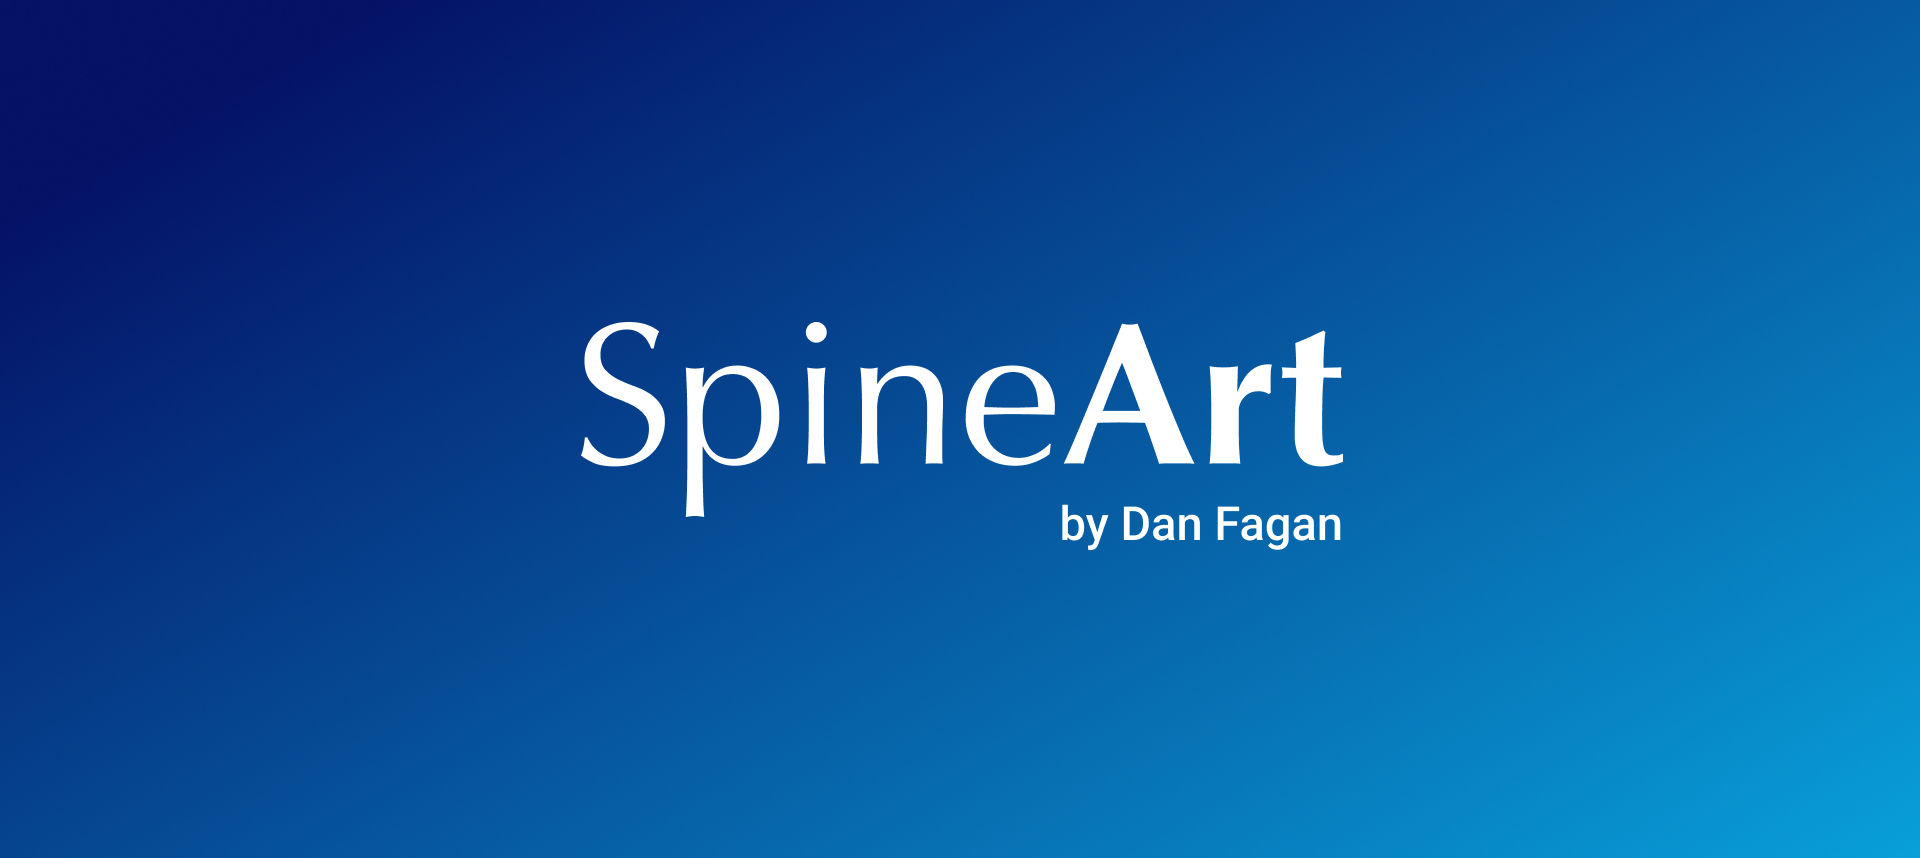 Managing Solutions working with Spine Art